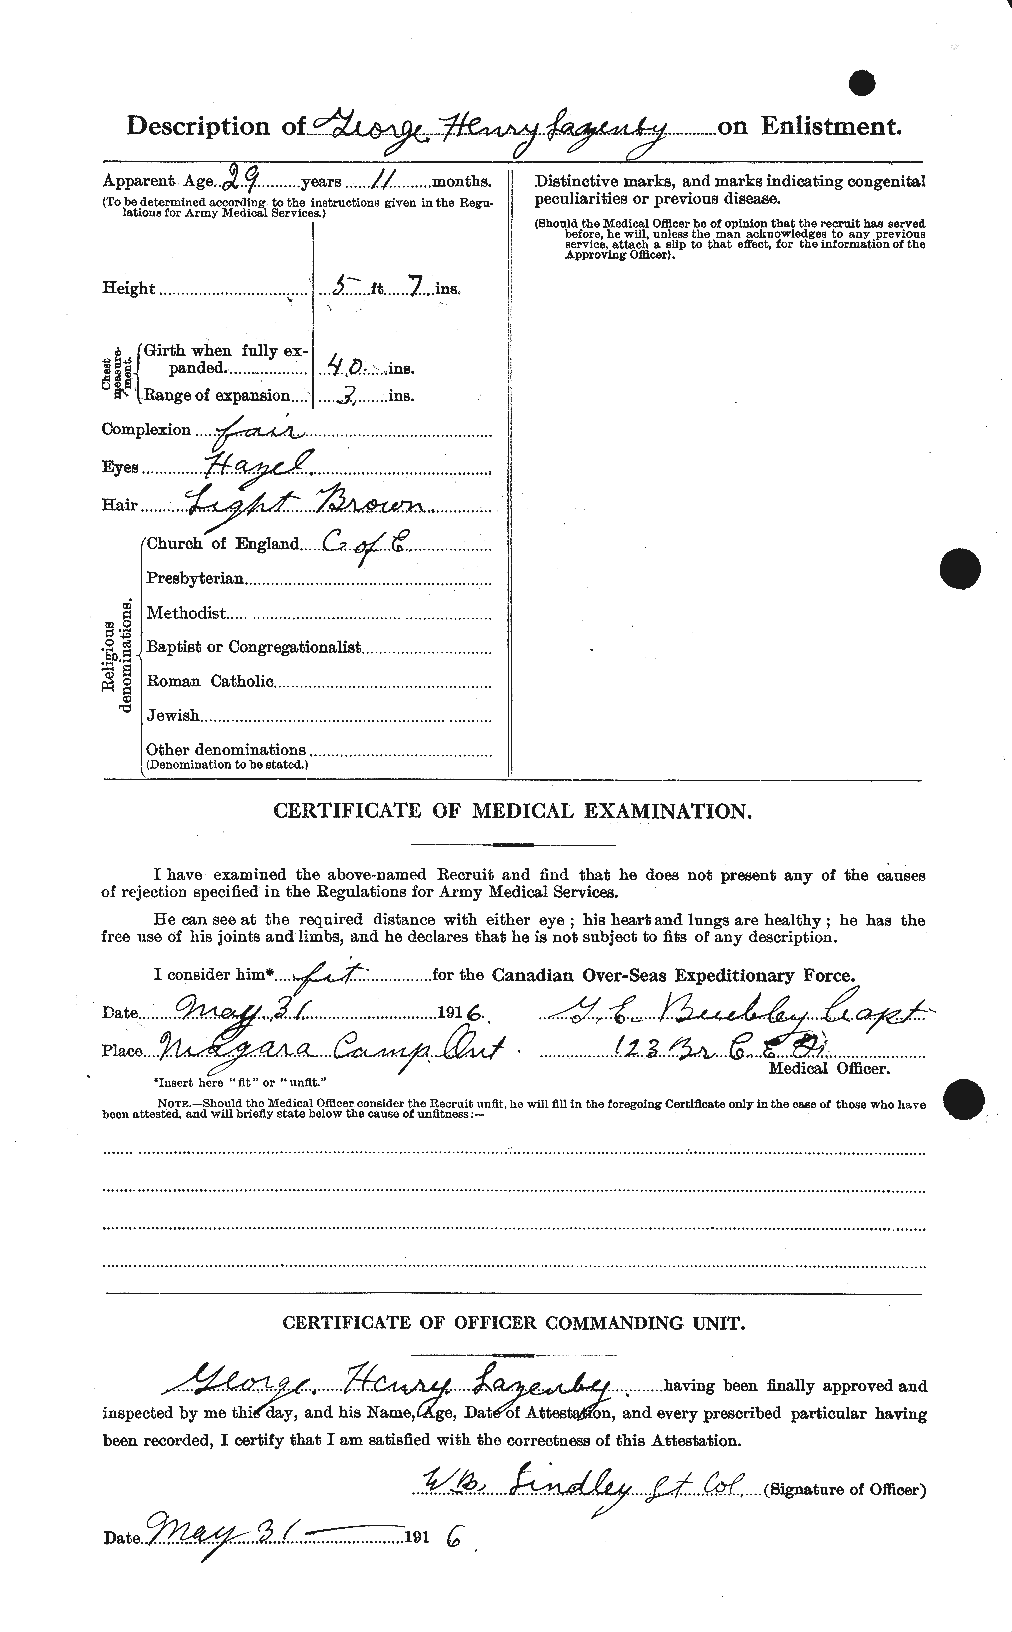 Personnel Records of the First World War - CEF 453202b